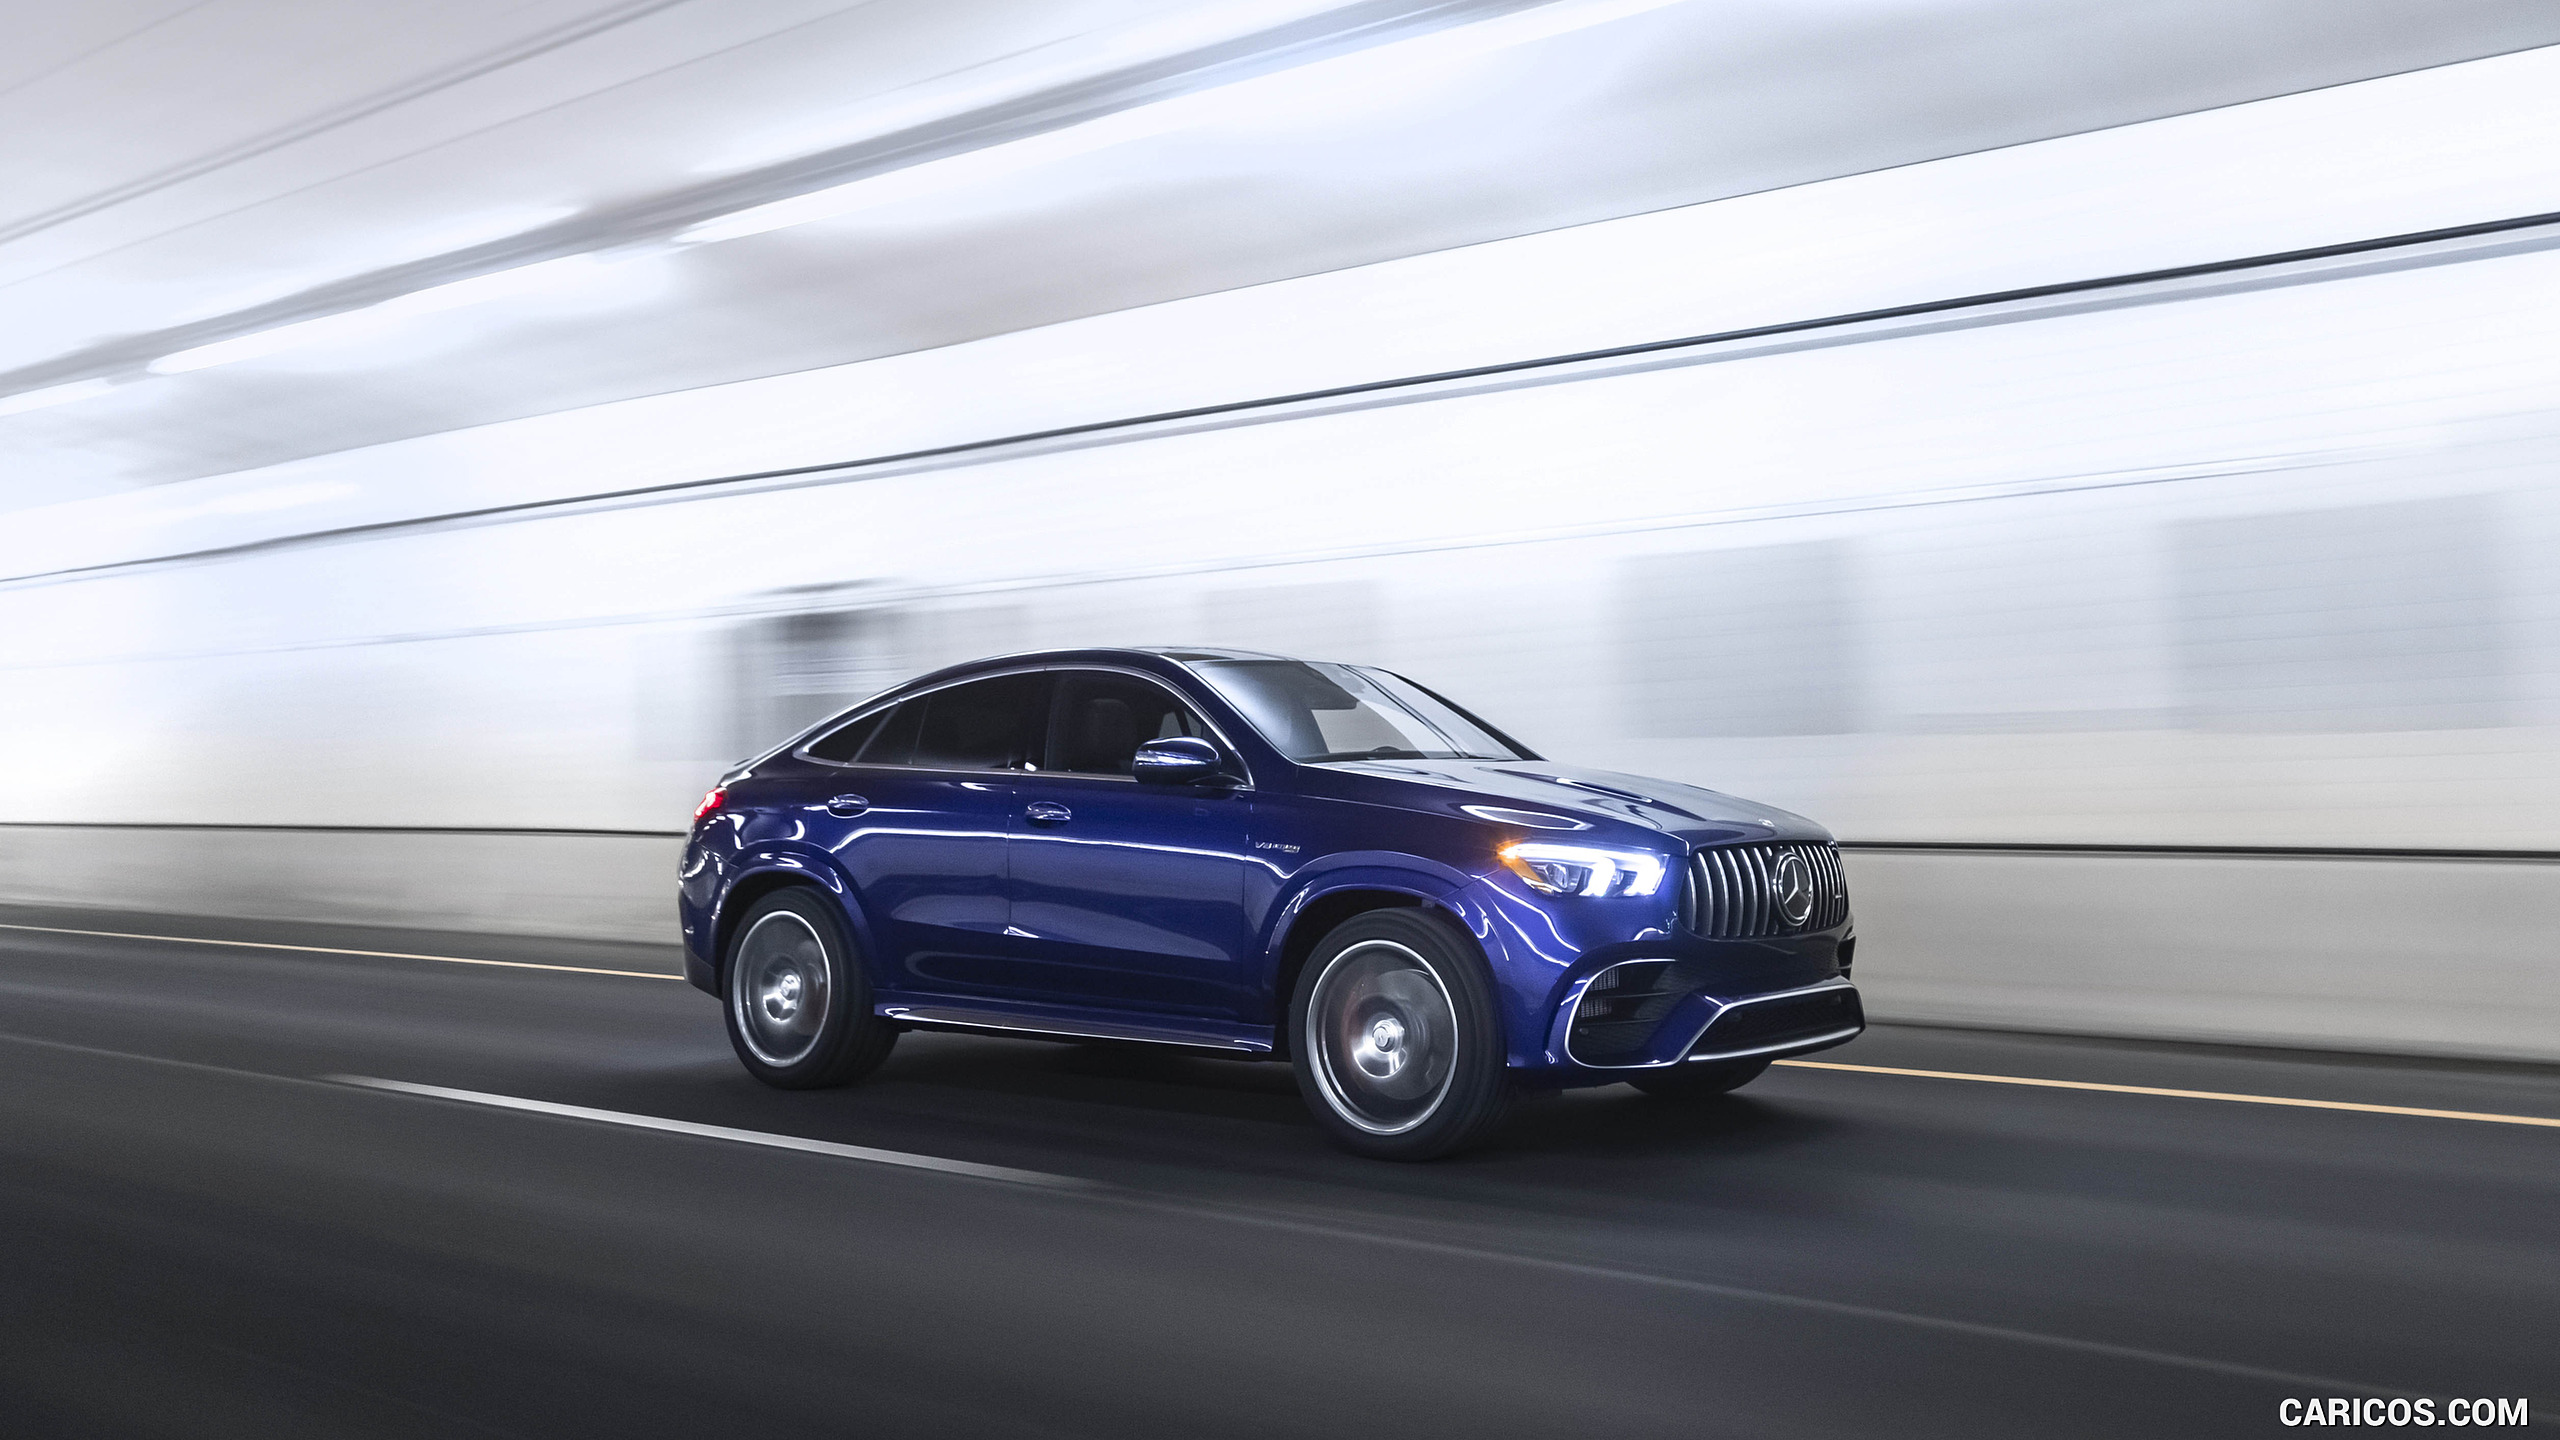 2021 Mercedes-AMG GLE 63 S Coupe (US-Spec) - Front Three-Quarter, #28 of 66